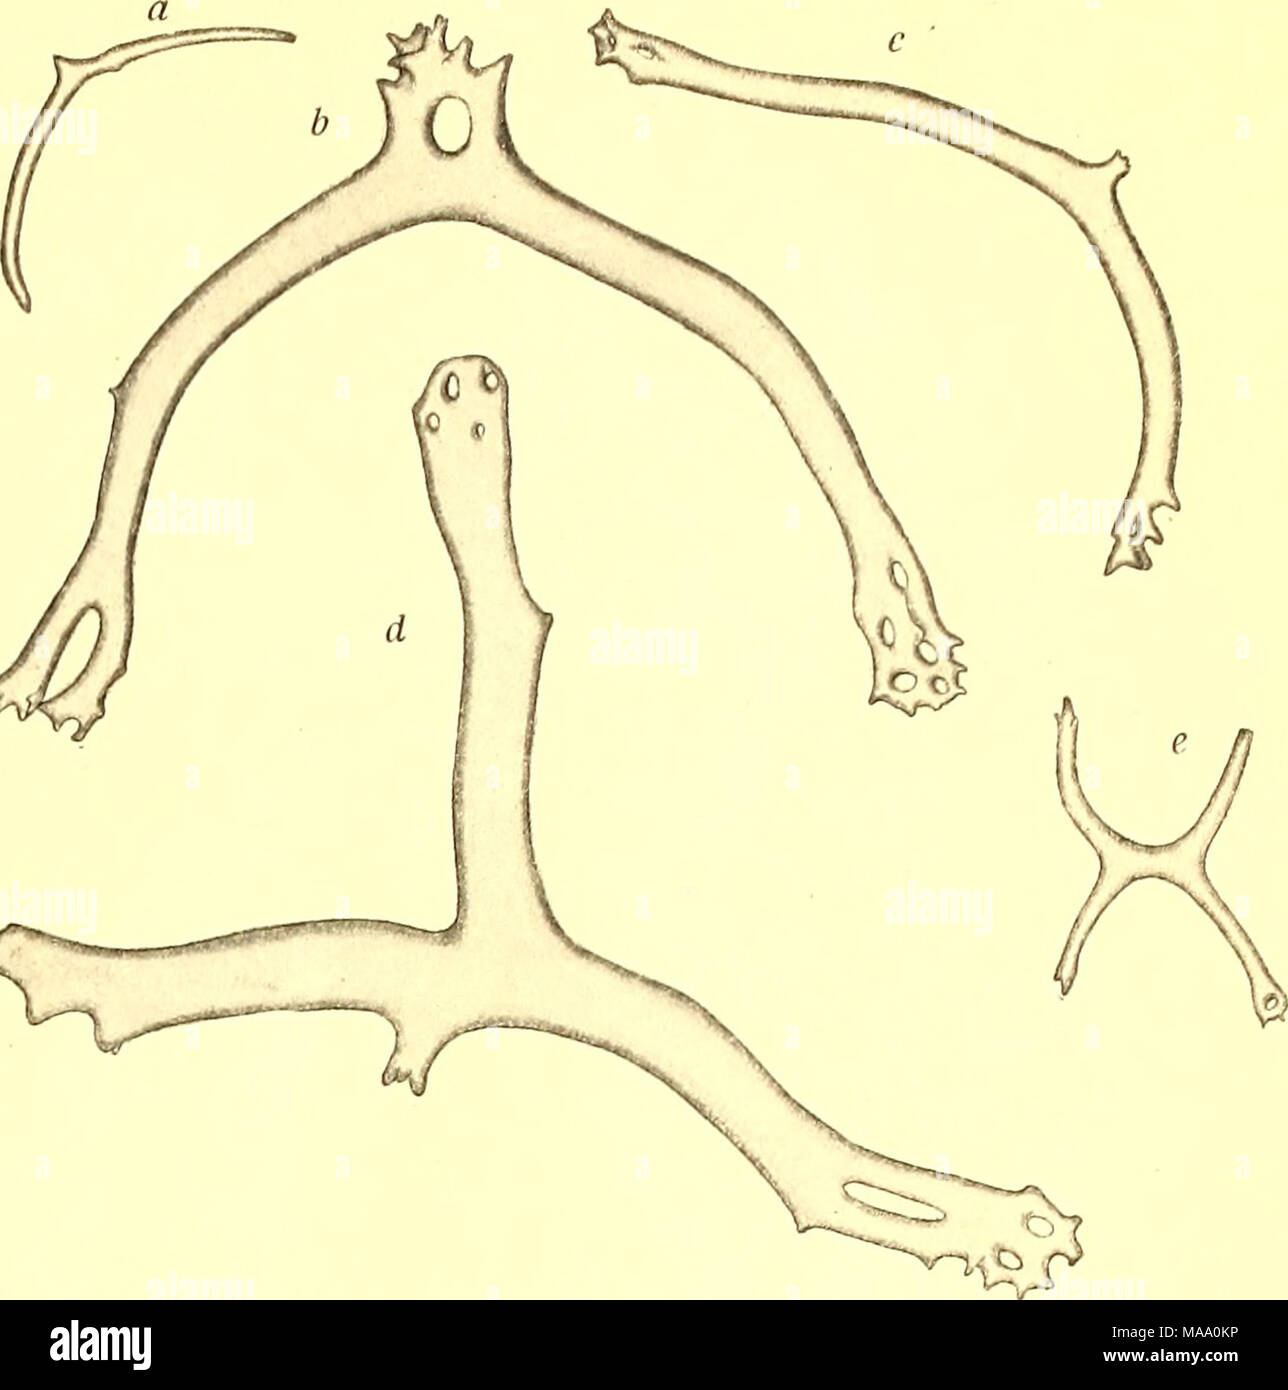 . Echinodermata . Fig. 9. Calcareous deposits from tentacles of Cucumaria abyssorum Theel. tross&quot; took it off the west coasts of Central America and Mexico, 1656—4084 m., temp. 2.1—2.9° Cel. and the &quot;Hirondelle&quot; at the Azores, 2870 m. Thus the species has a world-wide distribution. Holothuria tubulosa Gmelin. Holothuria tubulosa Gmelin, Syst. Nat., ed. 13, 1788, p. 3138. 20/s. Stat. 37, 26° 6' N., 14' 33' W., 39 m., shingle. Common. The specimens were chestnut brown on the dorsal and lemon yellow on the ventral side. Holothuria tubulosa is known from the Mediterranean, the Canar Stock Photo